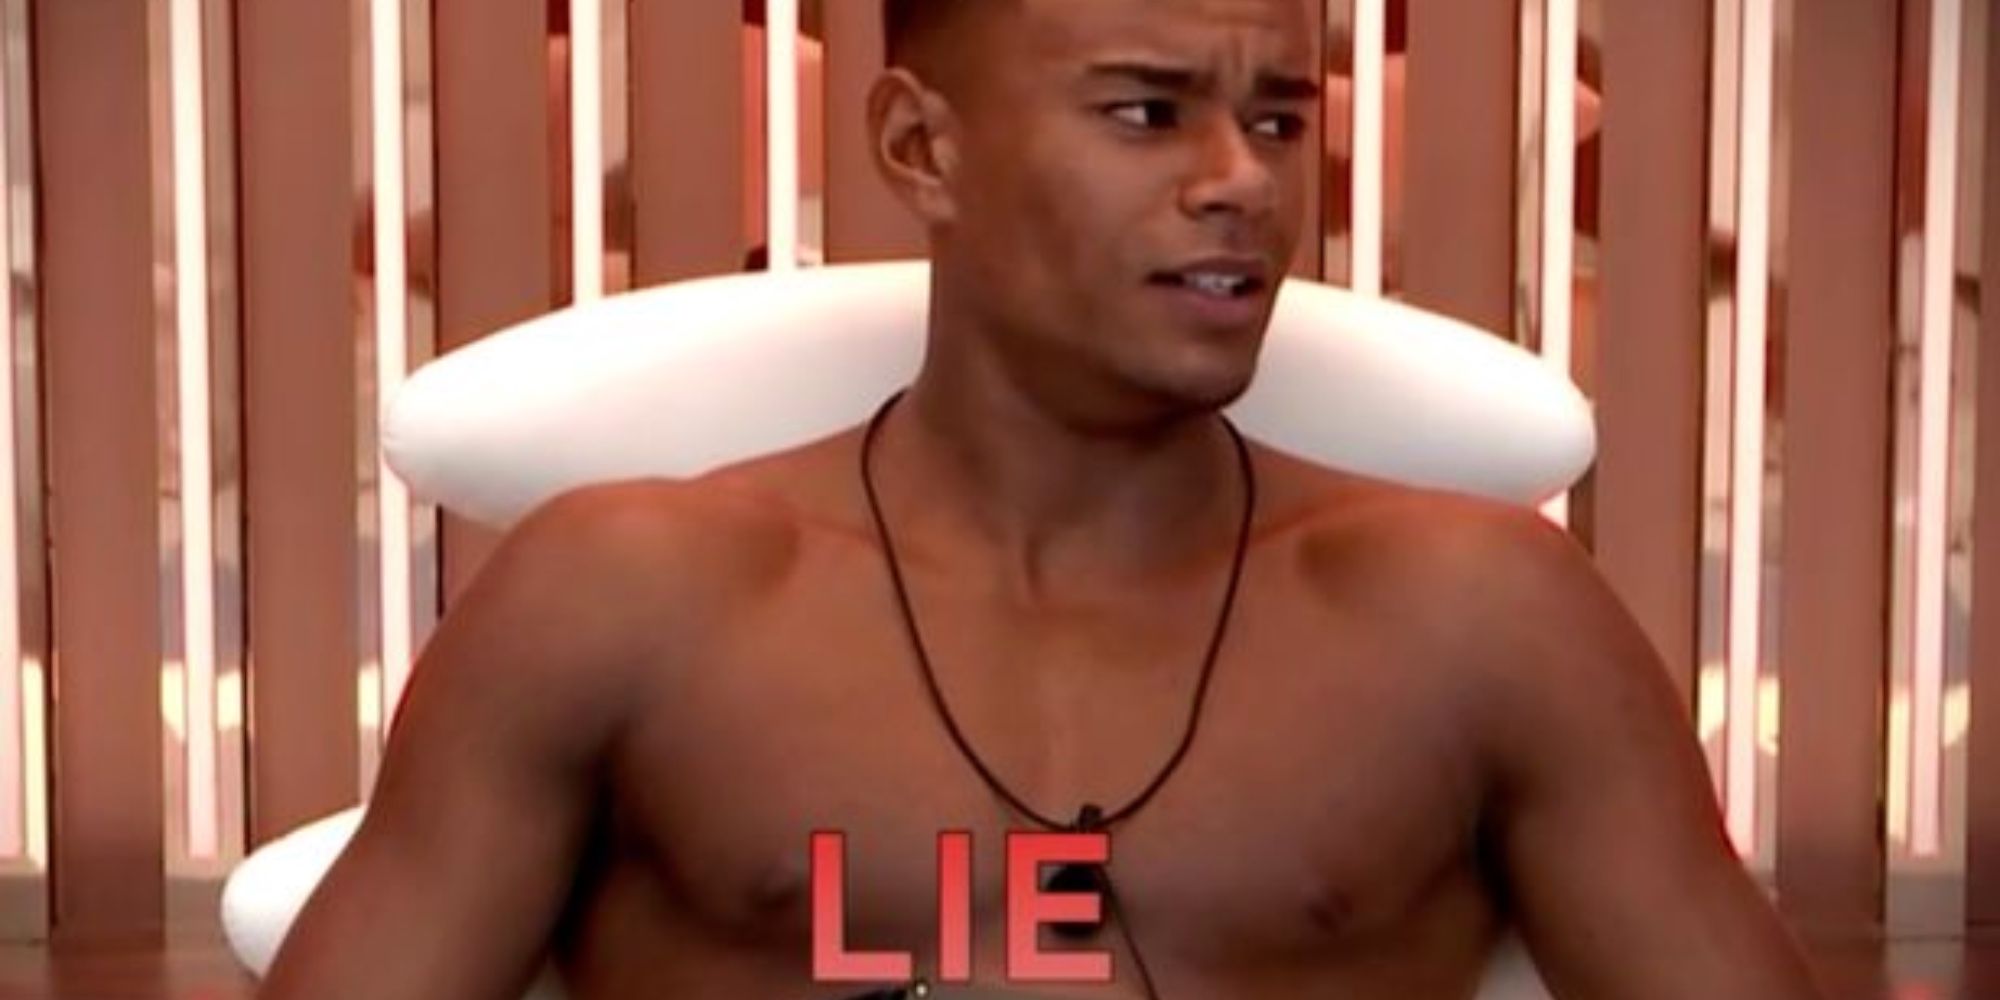 Love Island contestant Wes takes the lie detector test during season 5